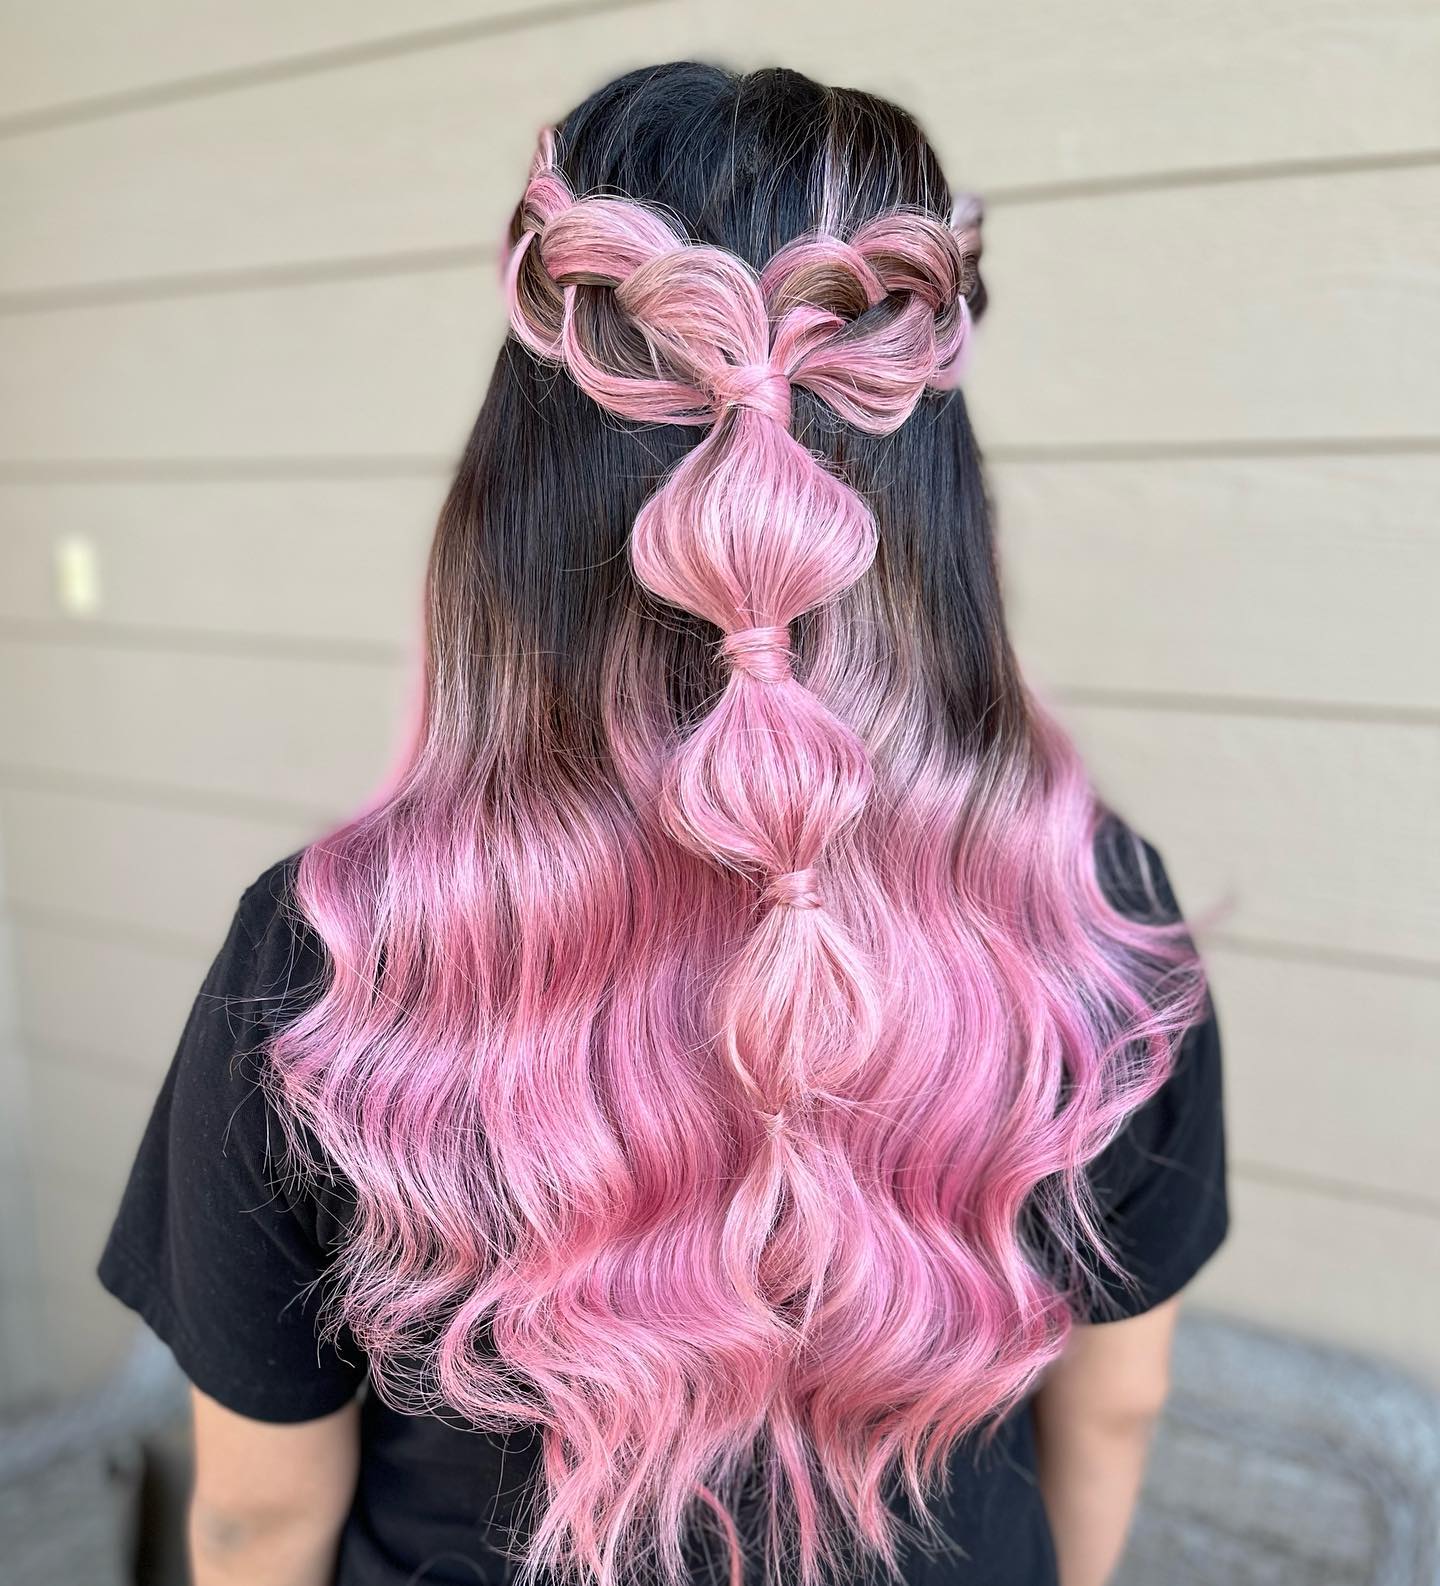 Bubble Braids on Dark Hair with Pink Ends